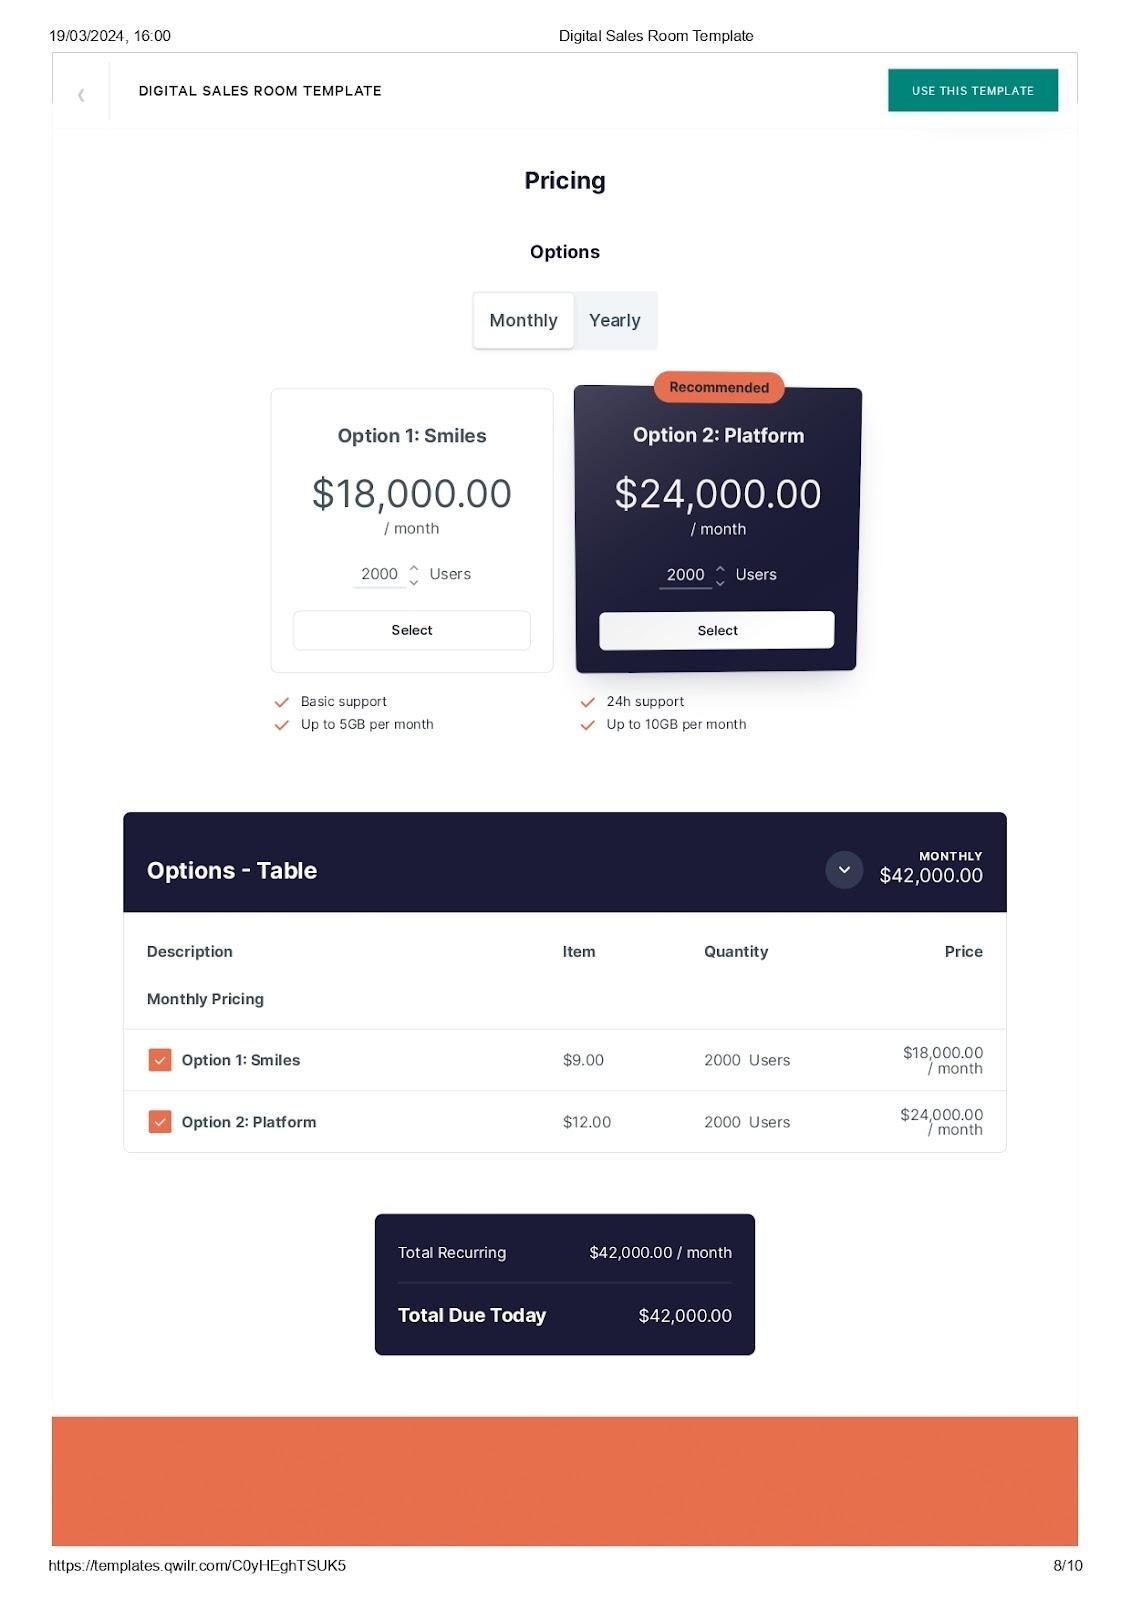 a screenshot of a pricing page for a digital sales room template .